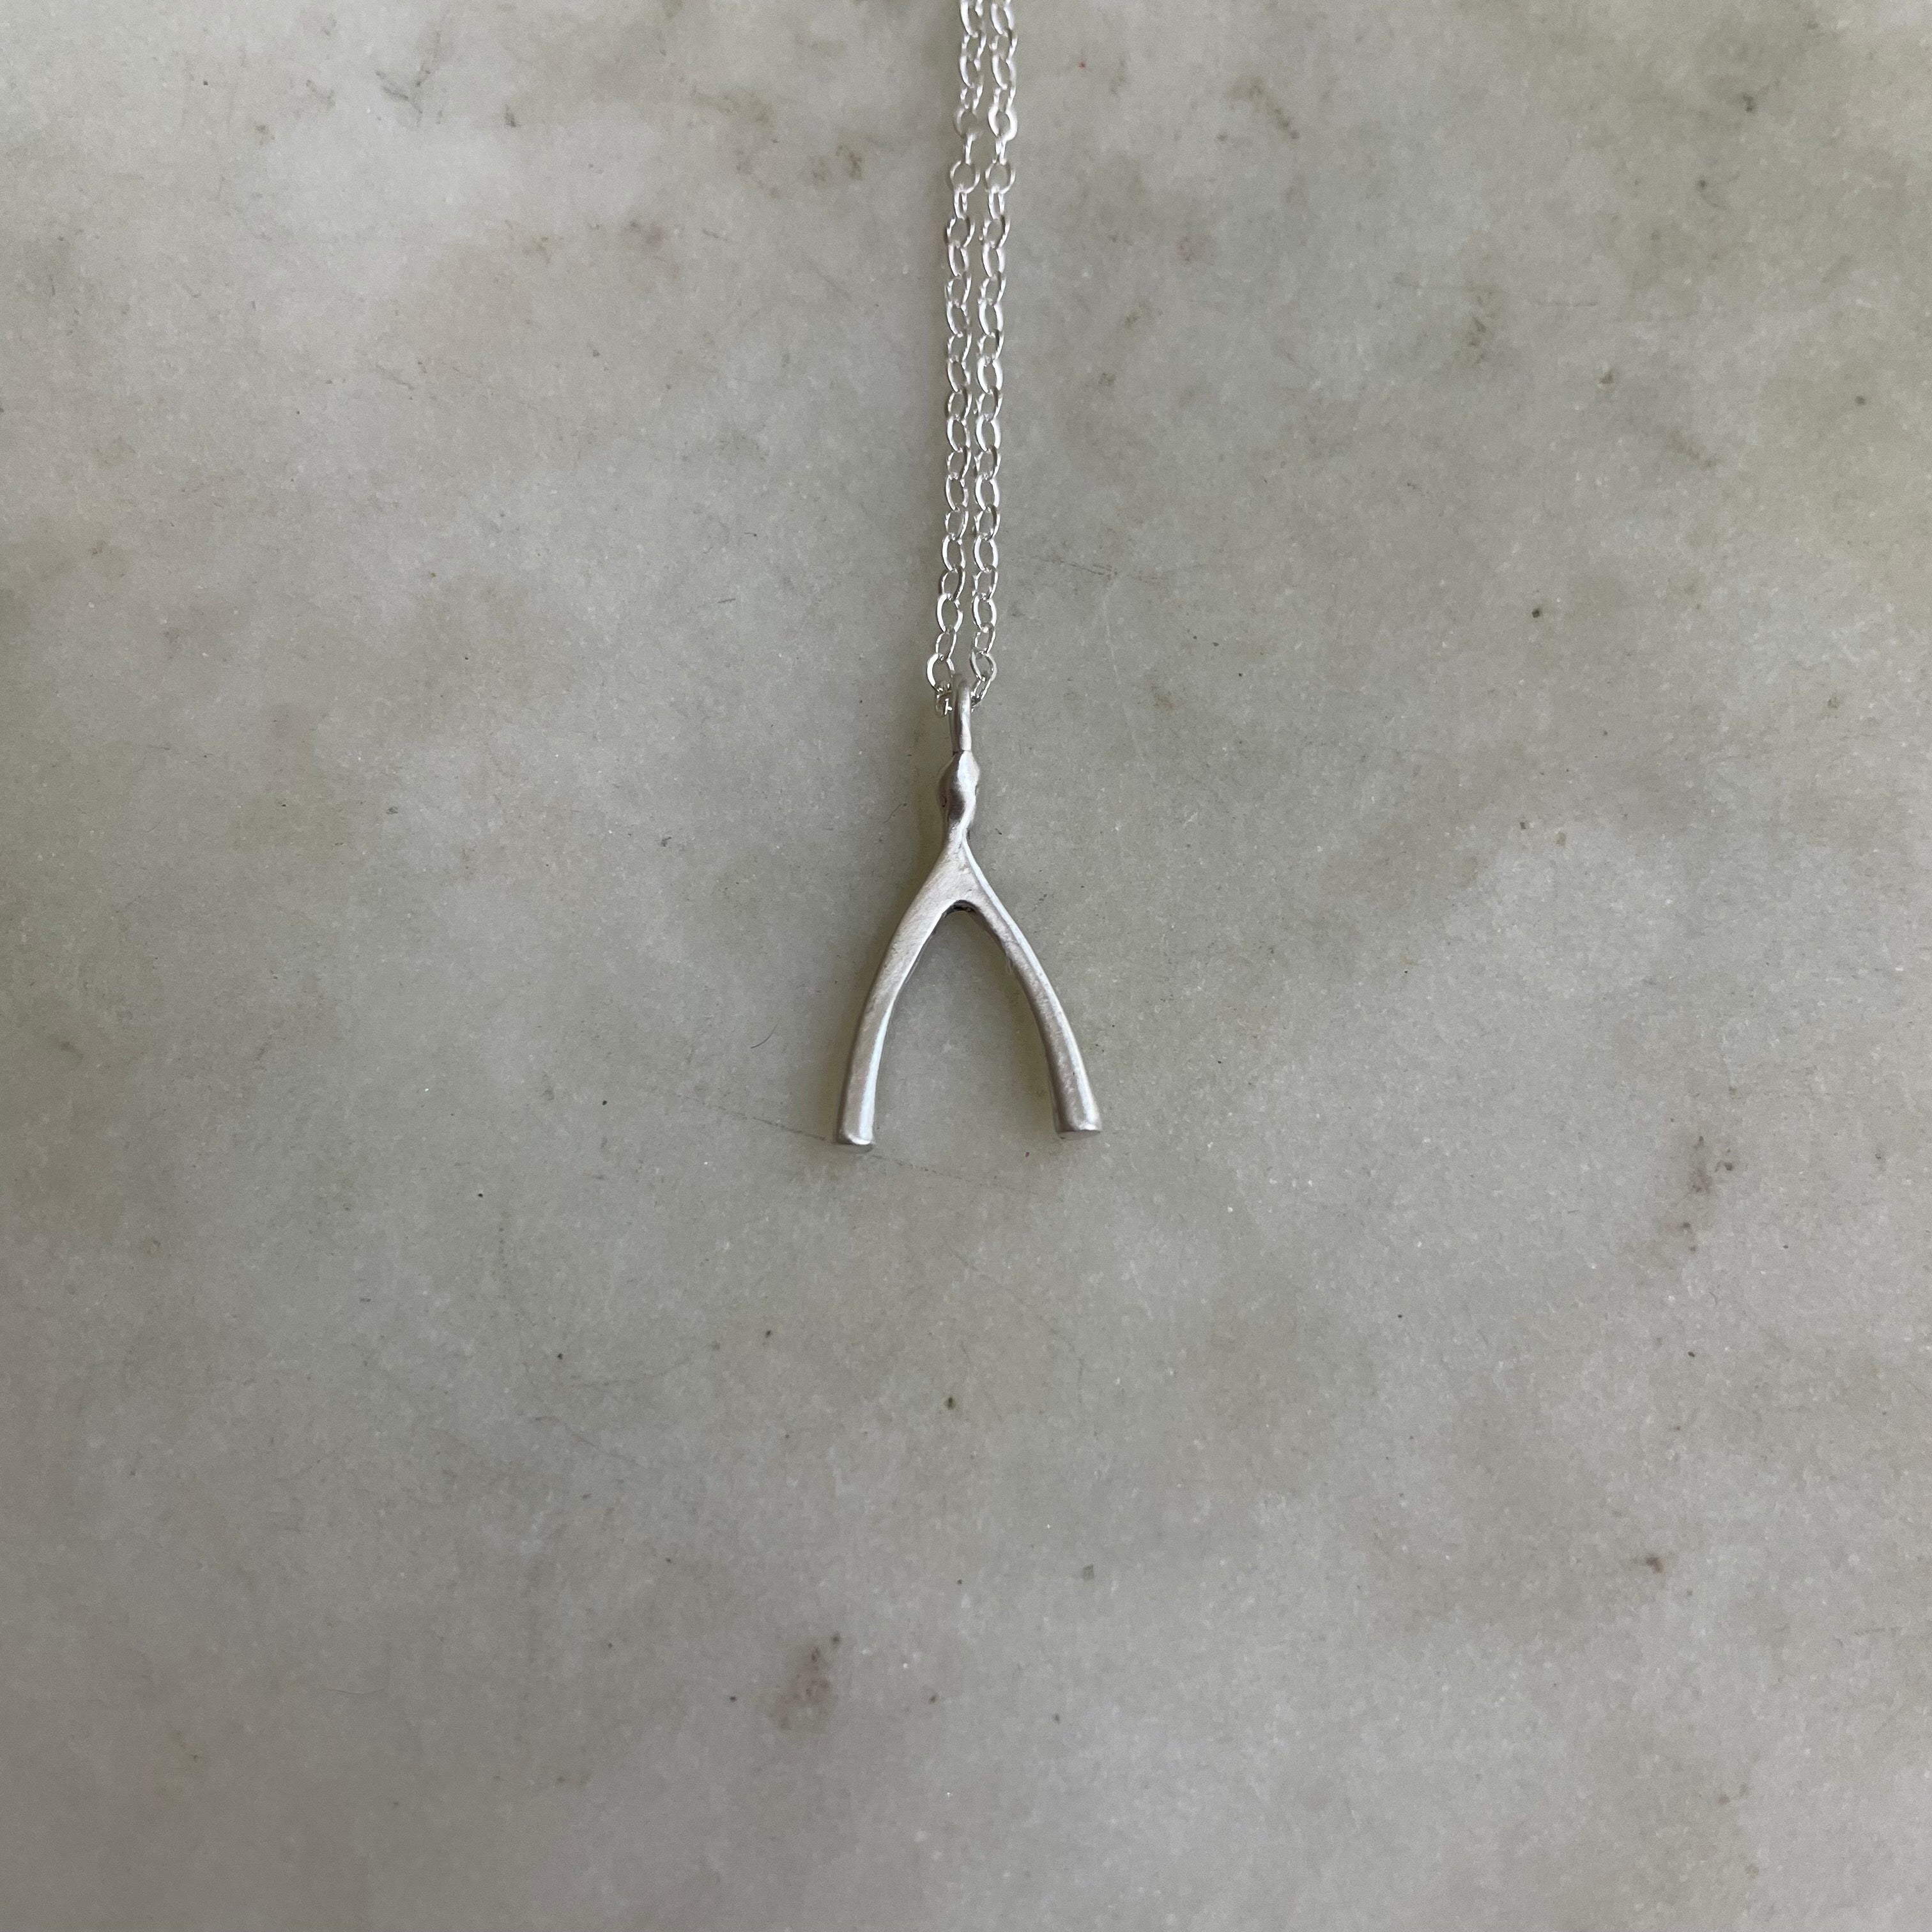 Buy Wishbone Necklace, Sterling Silver Wishbone Necklace, Good Luck Charm  Necklace, Silver Pendant Necklace, Silver Necklace, so You Jewellery Online  in India - Etsy